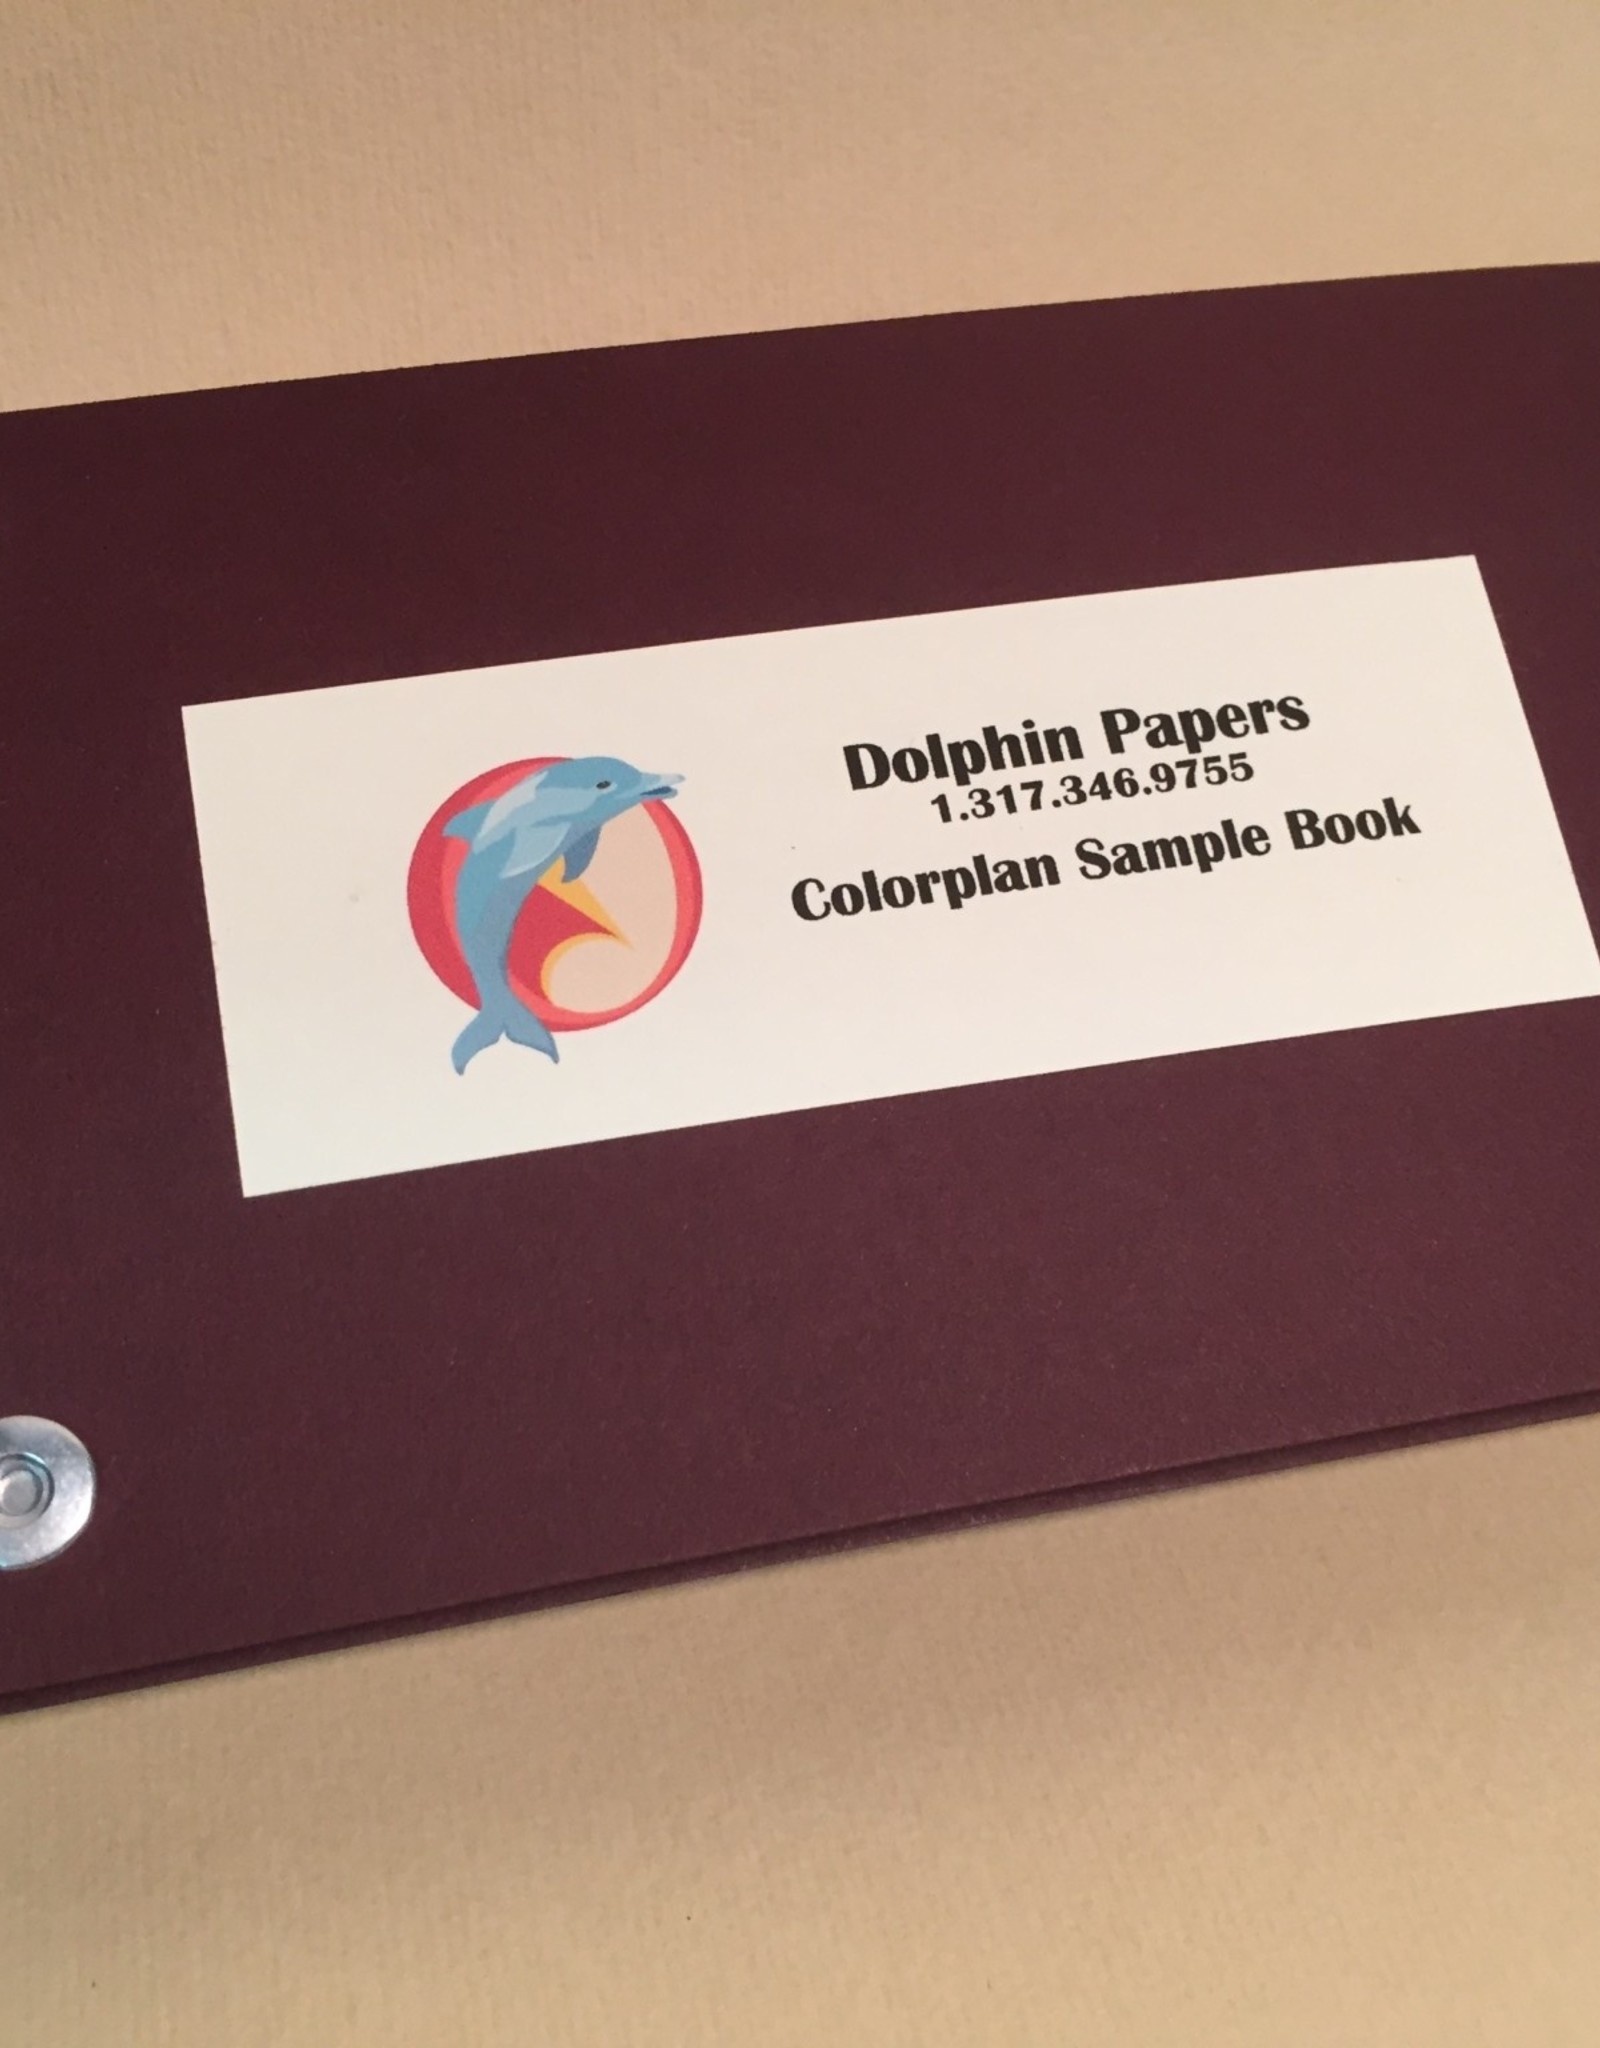 Dolphin Papers Colorplan, Sample Book, 6.5” x 3.5”